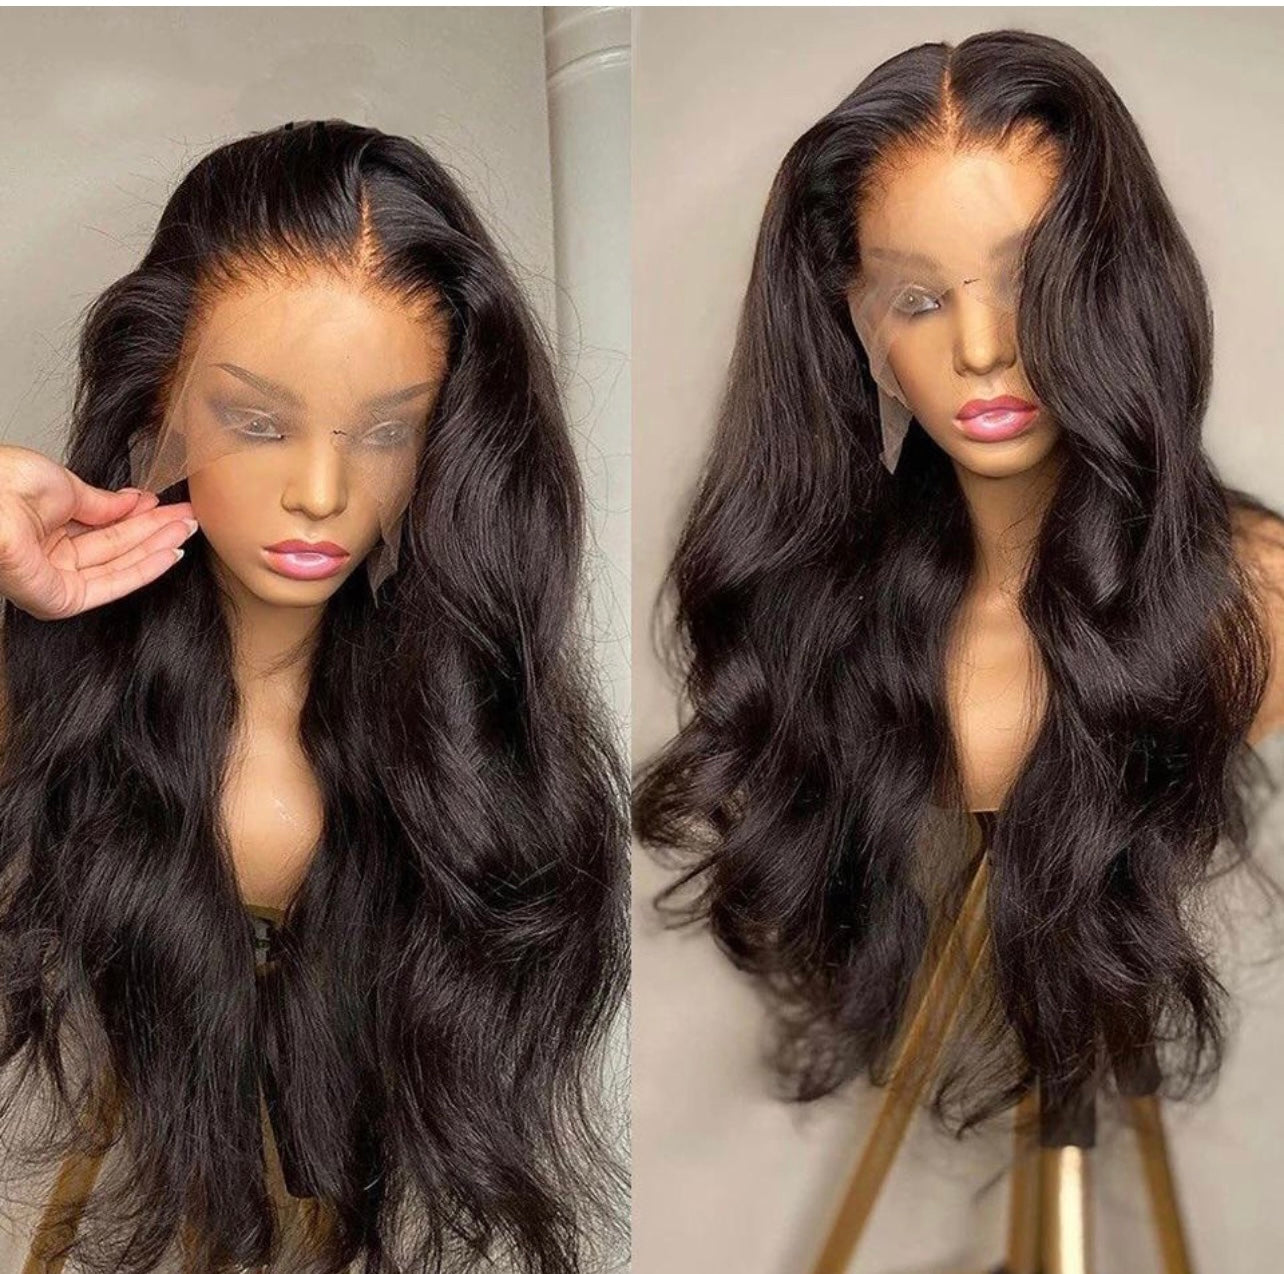 Custom wig order Fee - Her Ego Hair Collection